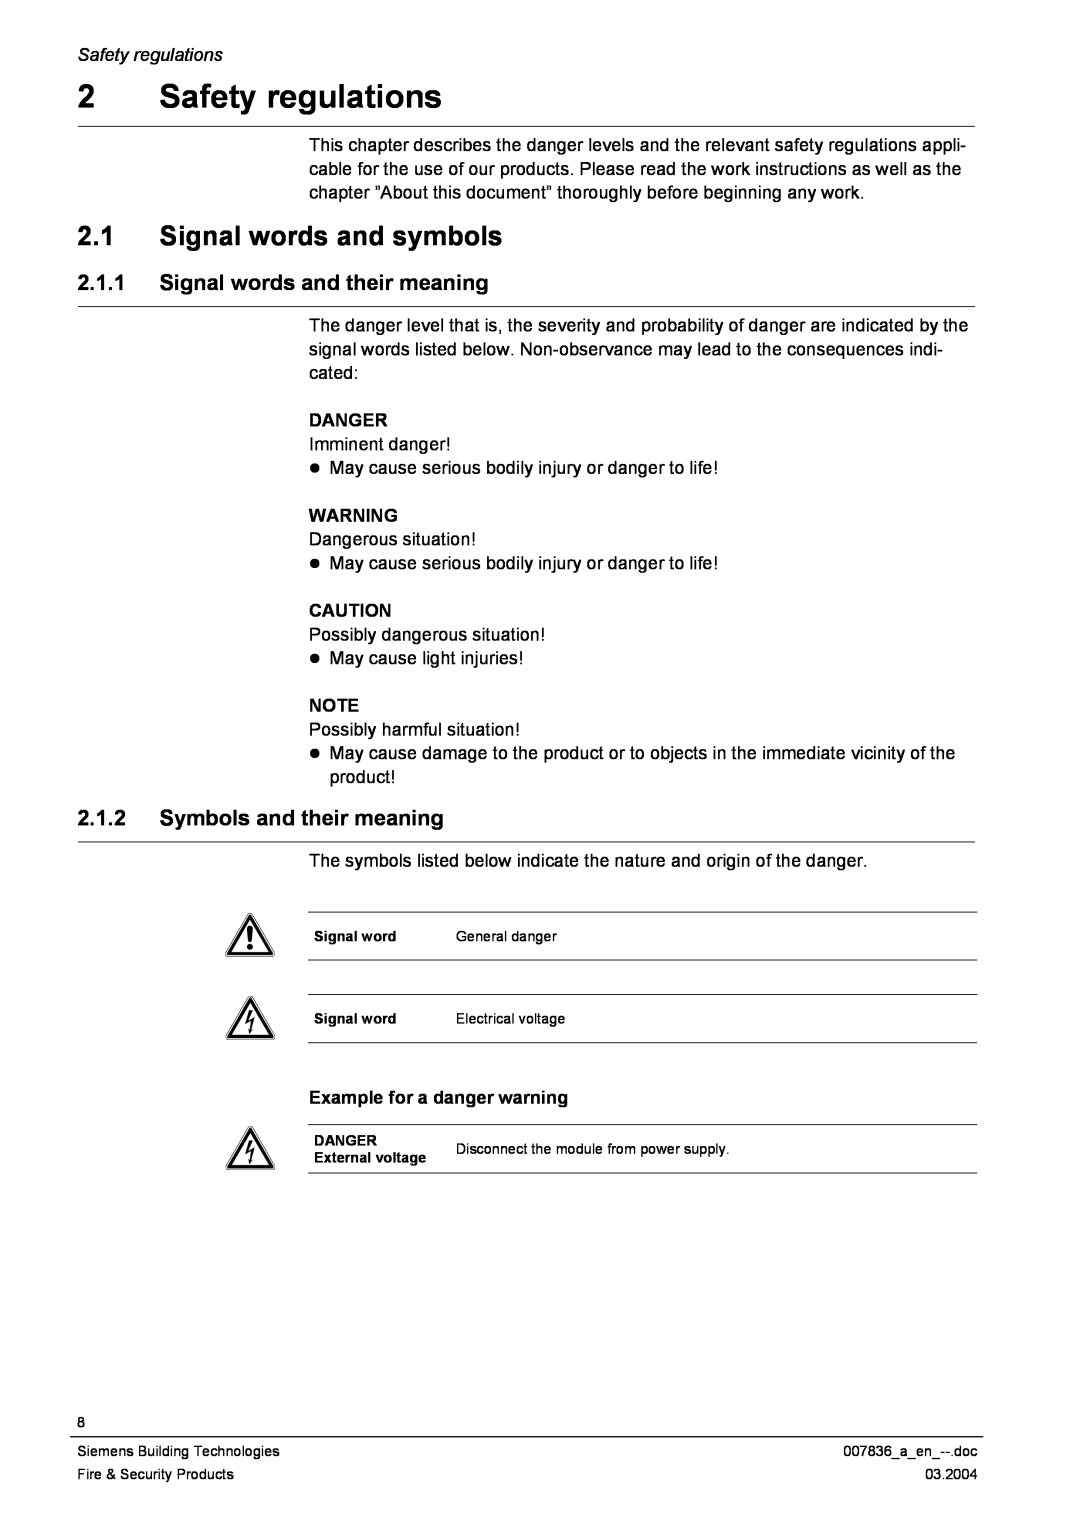 Siemens FC700A manual Safety regulations, 2.1Signal words and symbols, 2.1.1Signal words and their meaning, Danger 